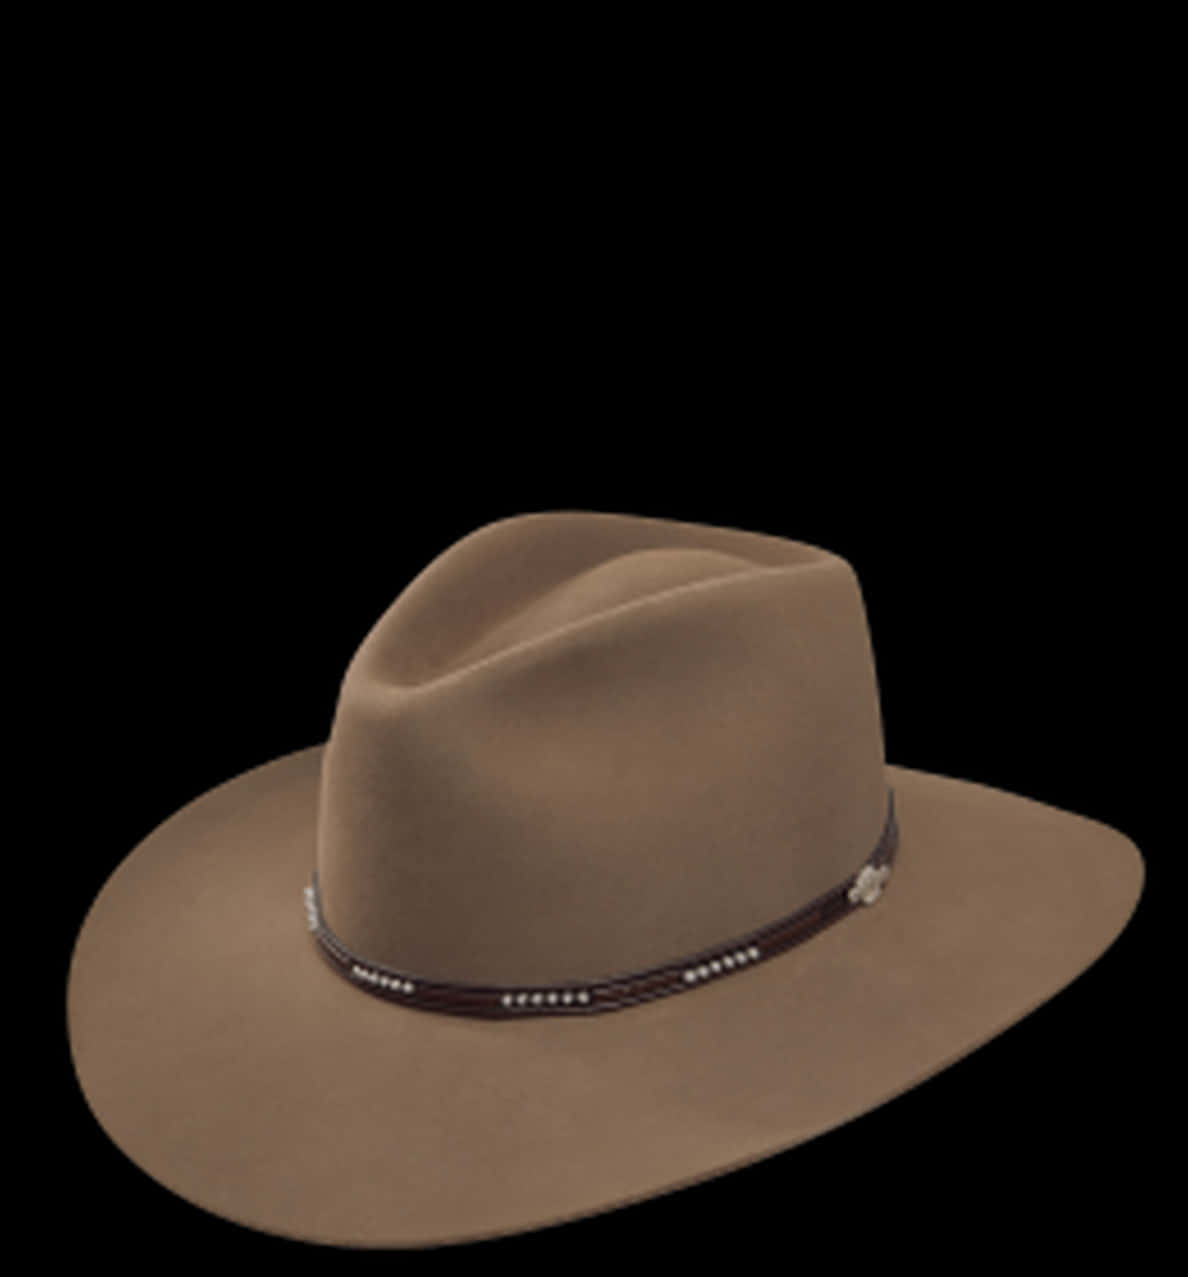 Classic Brown Cowboy Hat PNG image